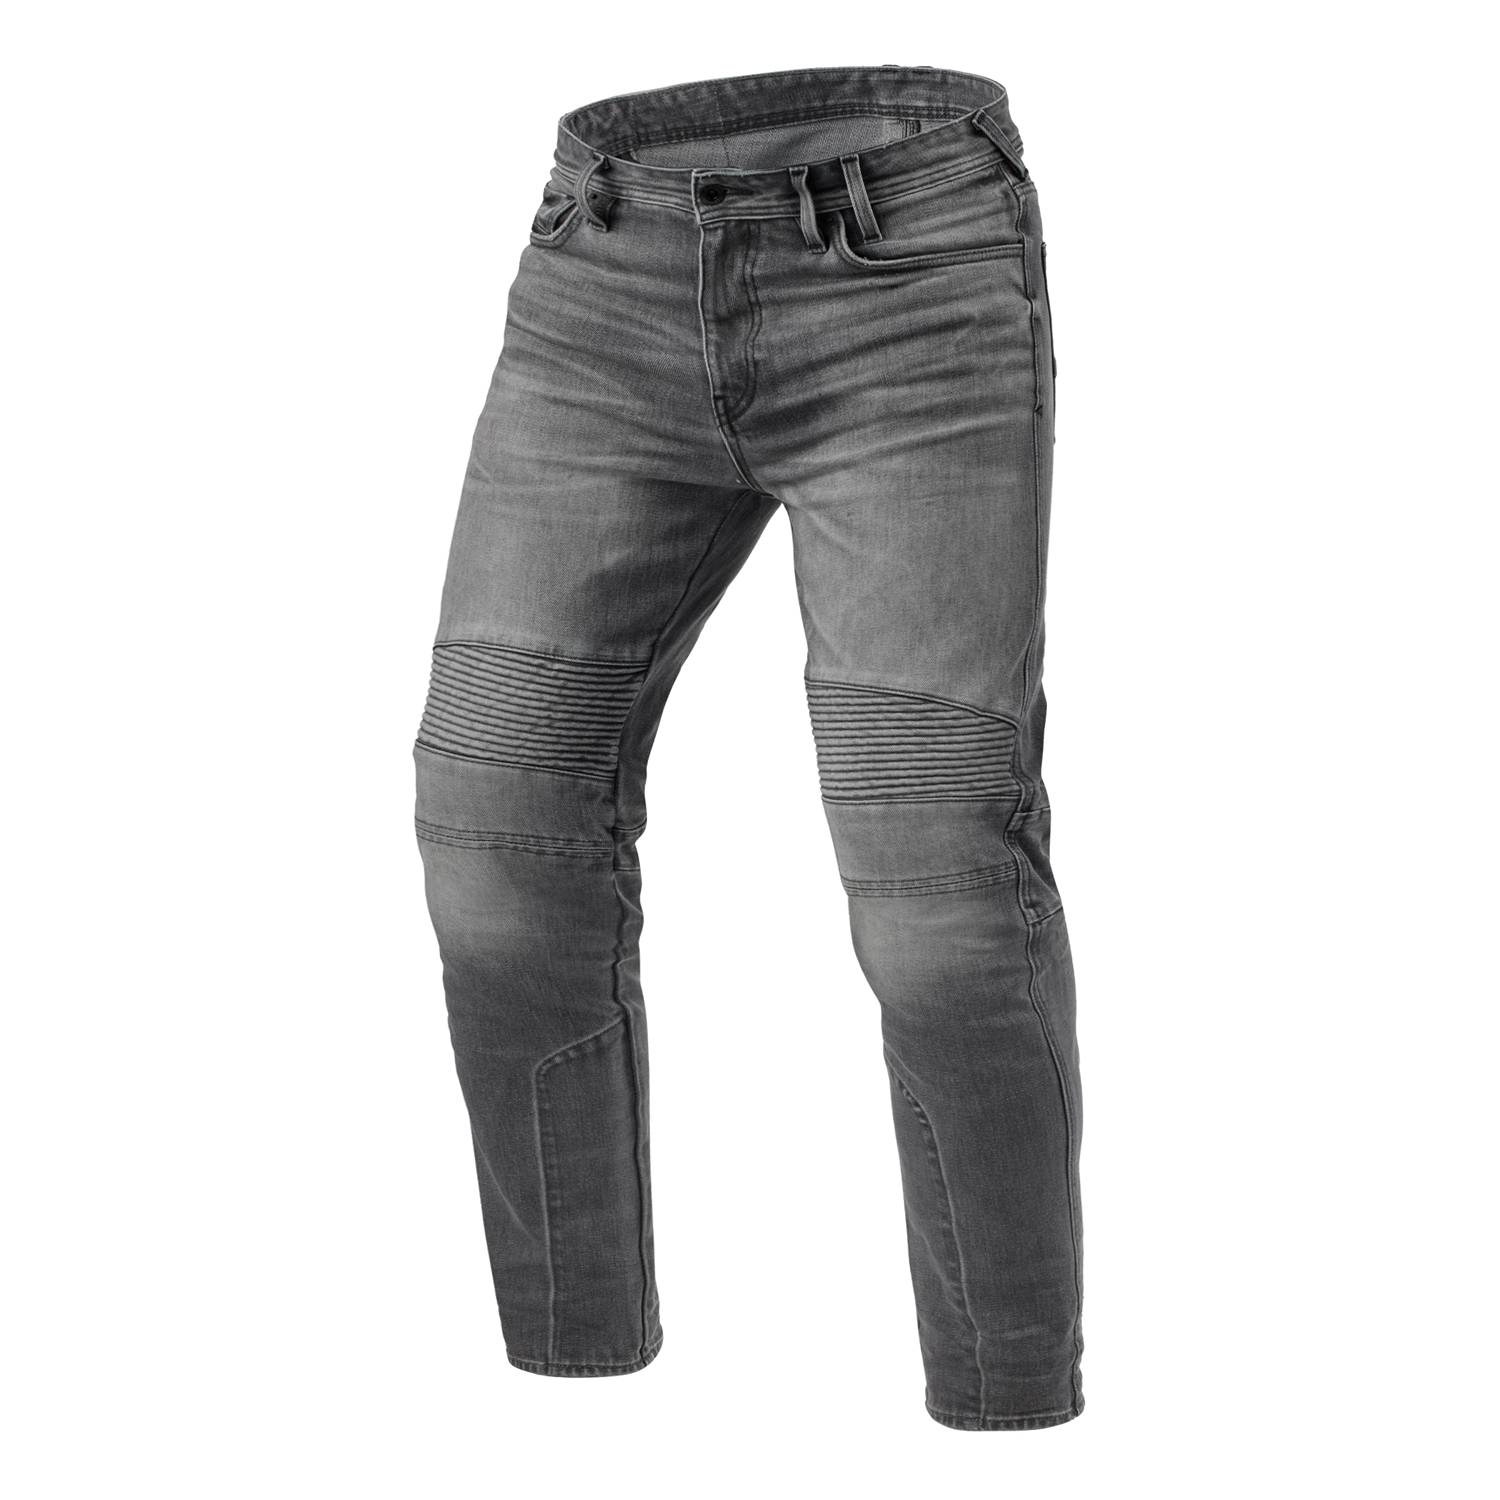 Image of REV'IT! Jeans Moto 2 TF Medium Grey Used L36 Motorcycle Jeans Taille L36/W31